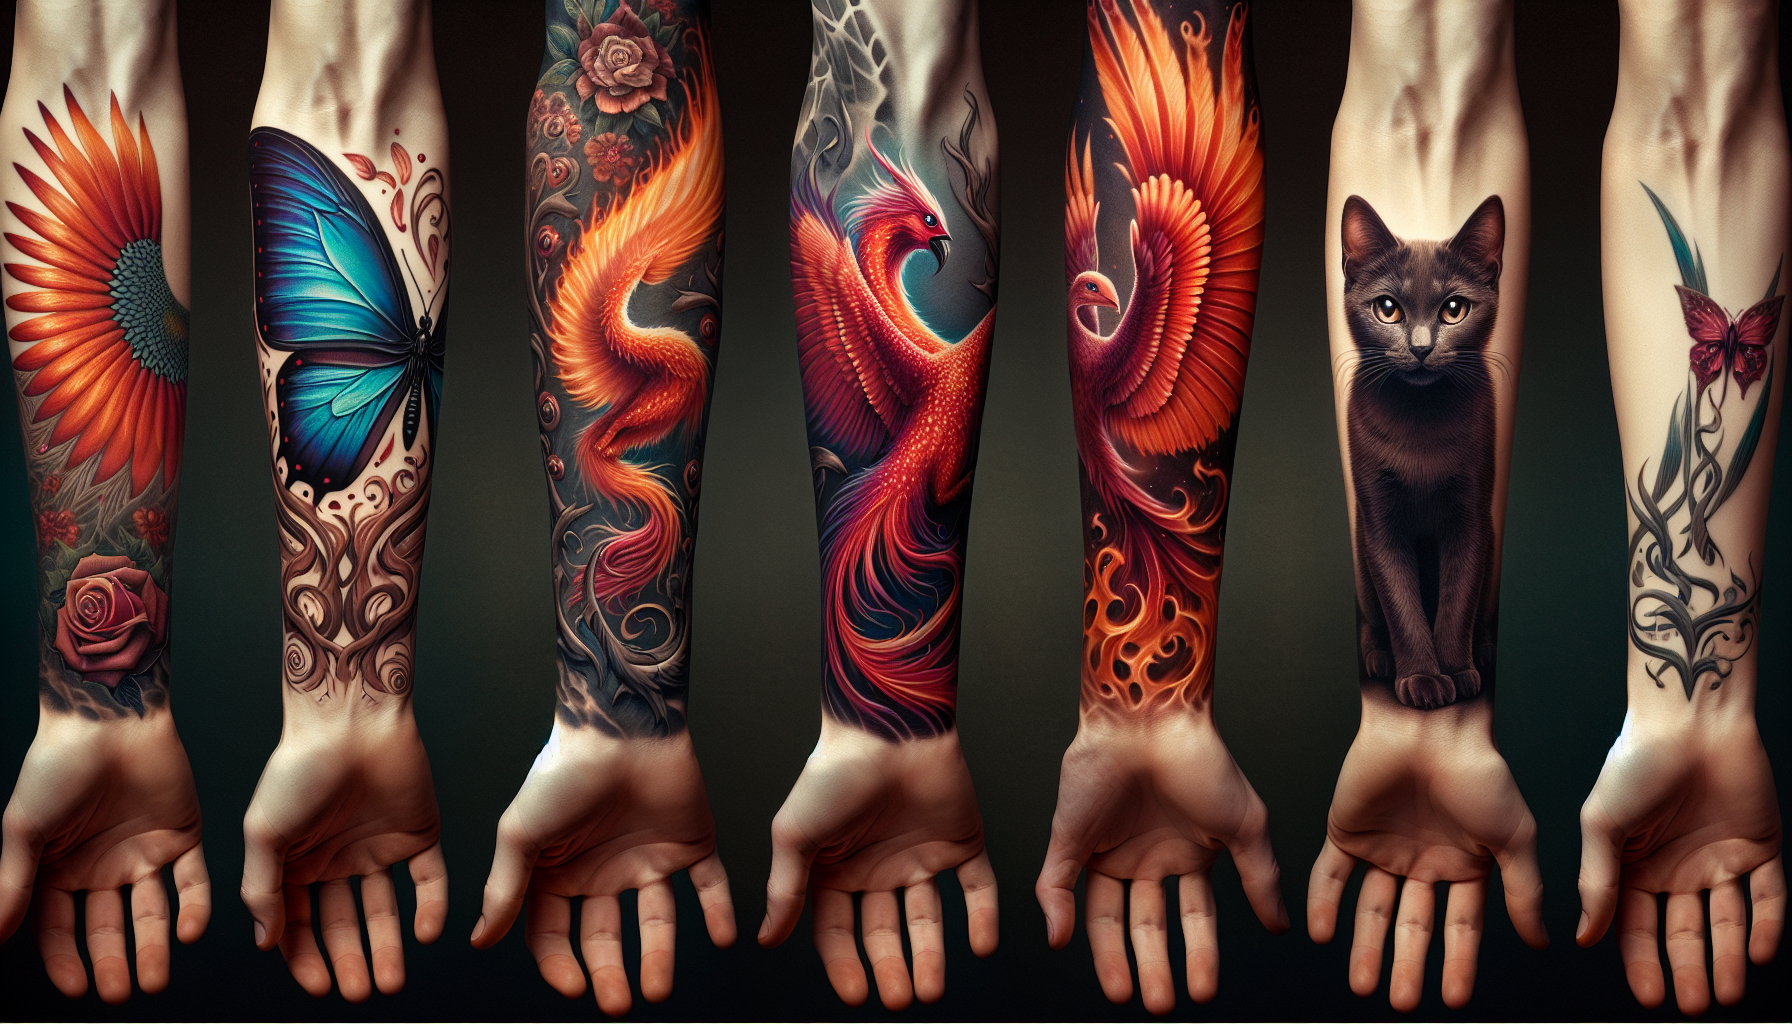 Animal-inspired tattoos including butterflies, phoenixes, and cats